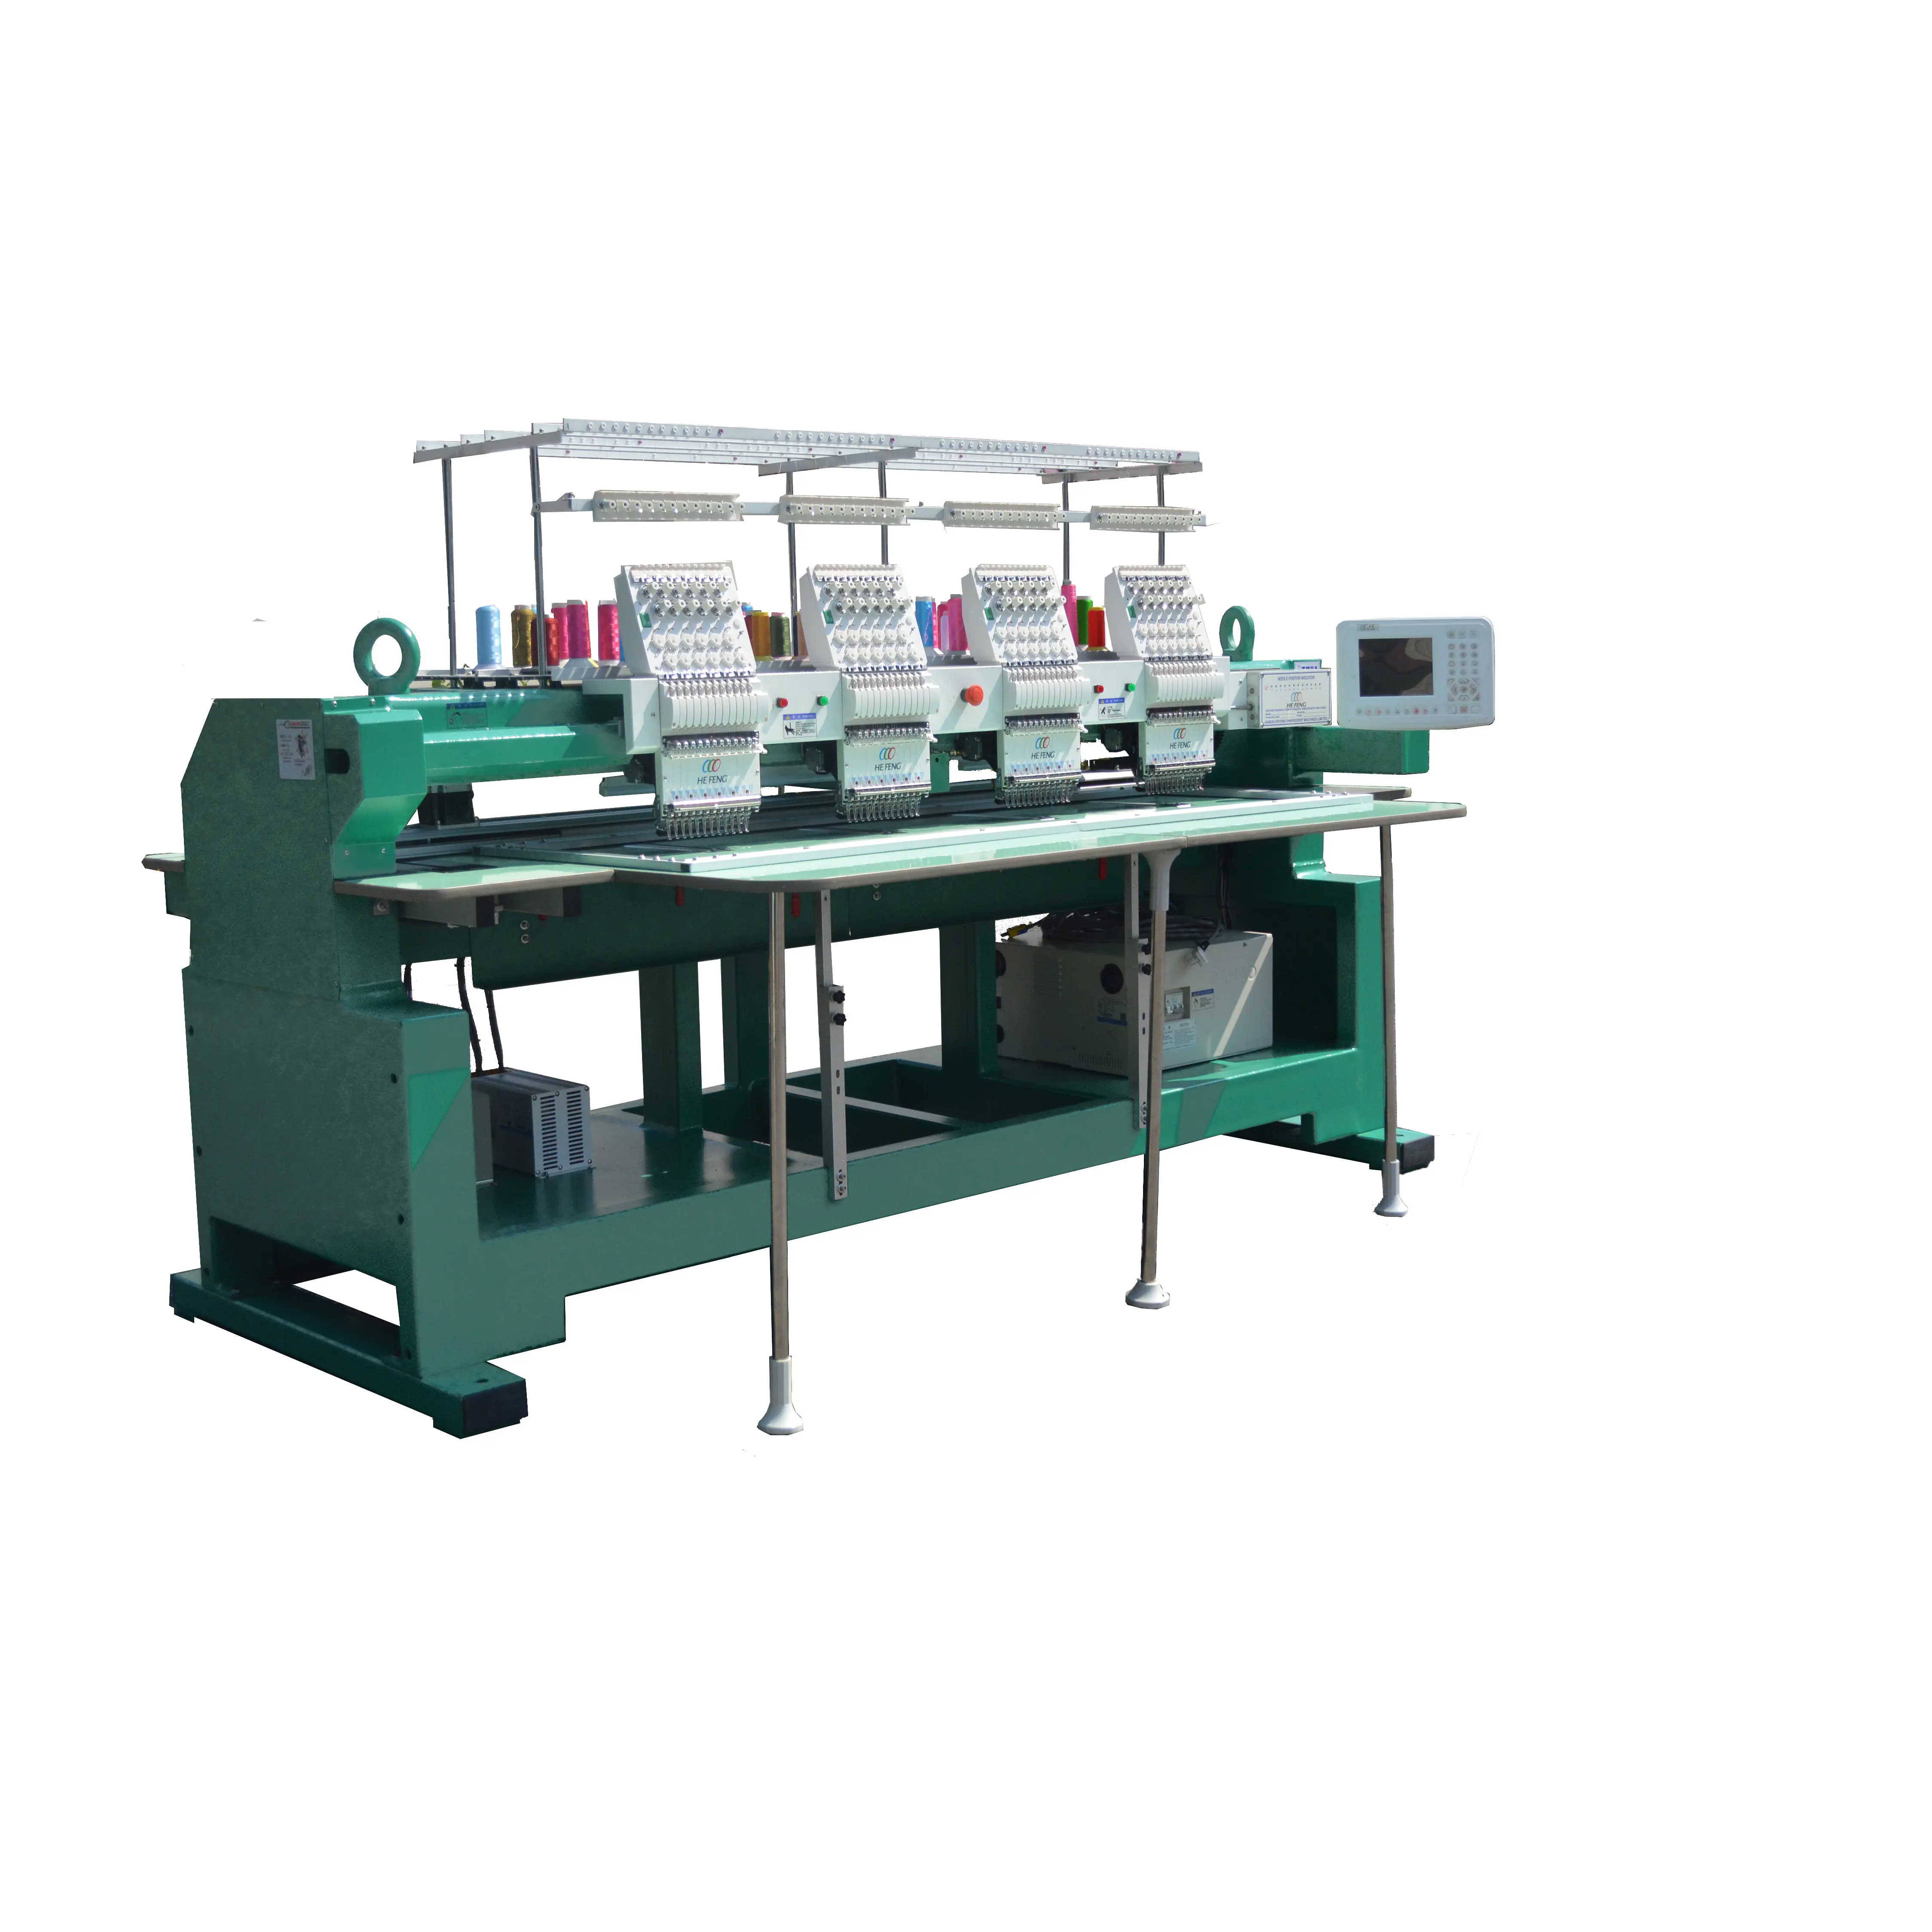 HeFeng Brand 4 heads embroidery machine with 16 years experience in a top position on technology